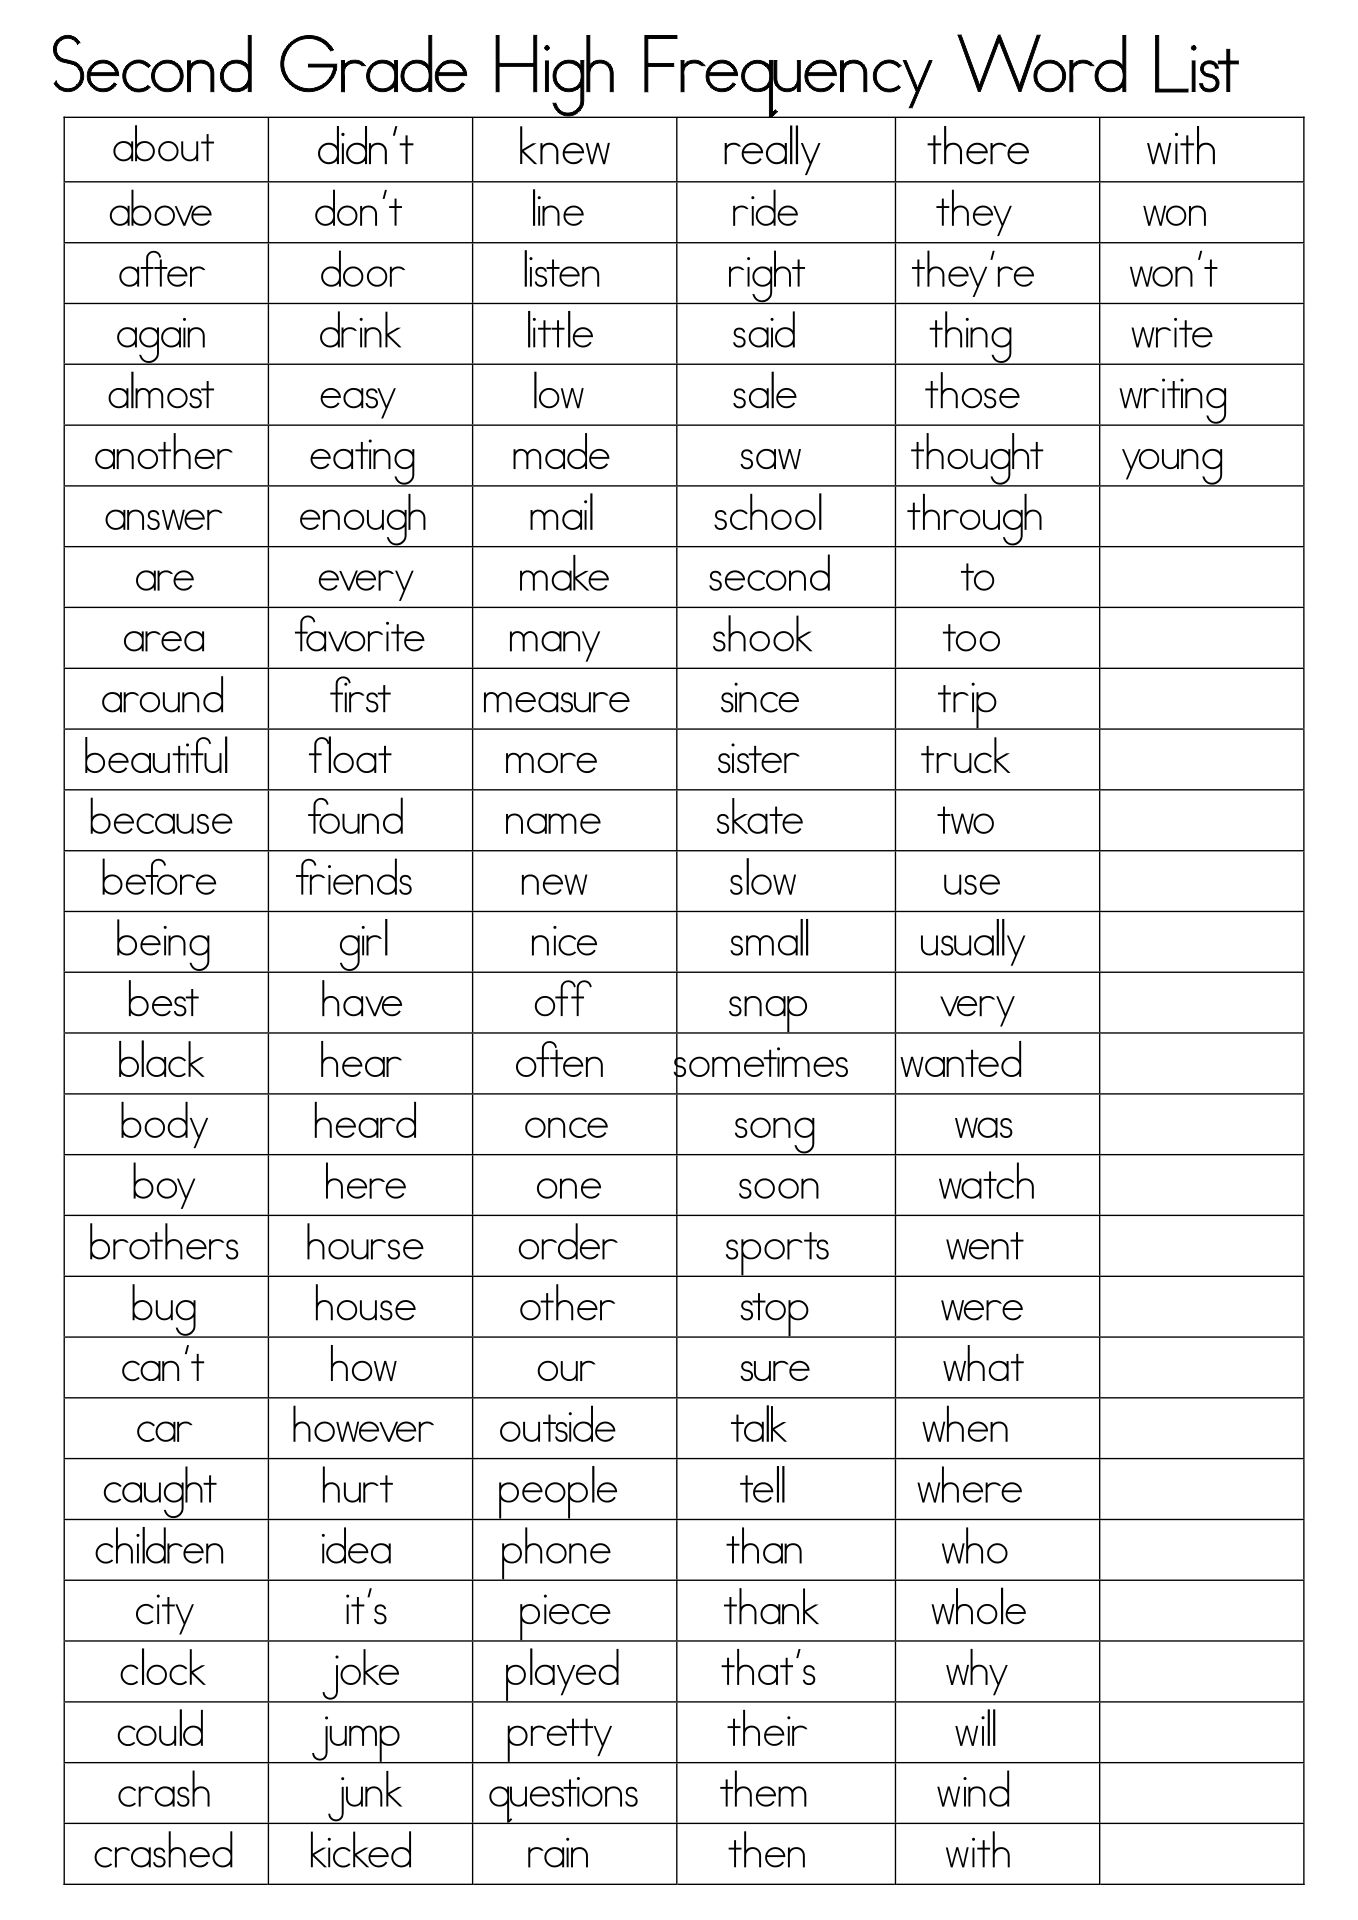 Second Grade High Frequency Words List